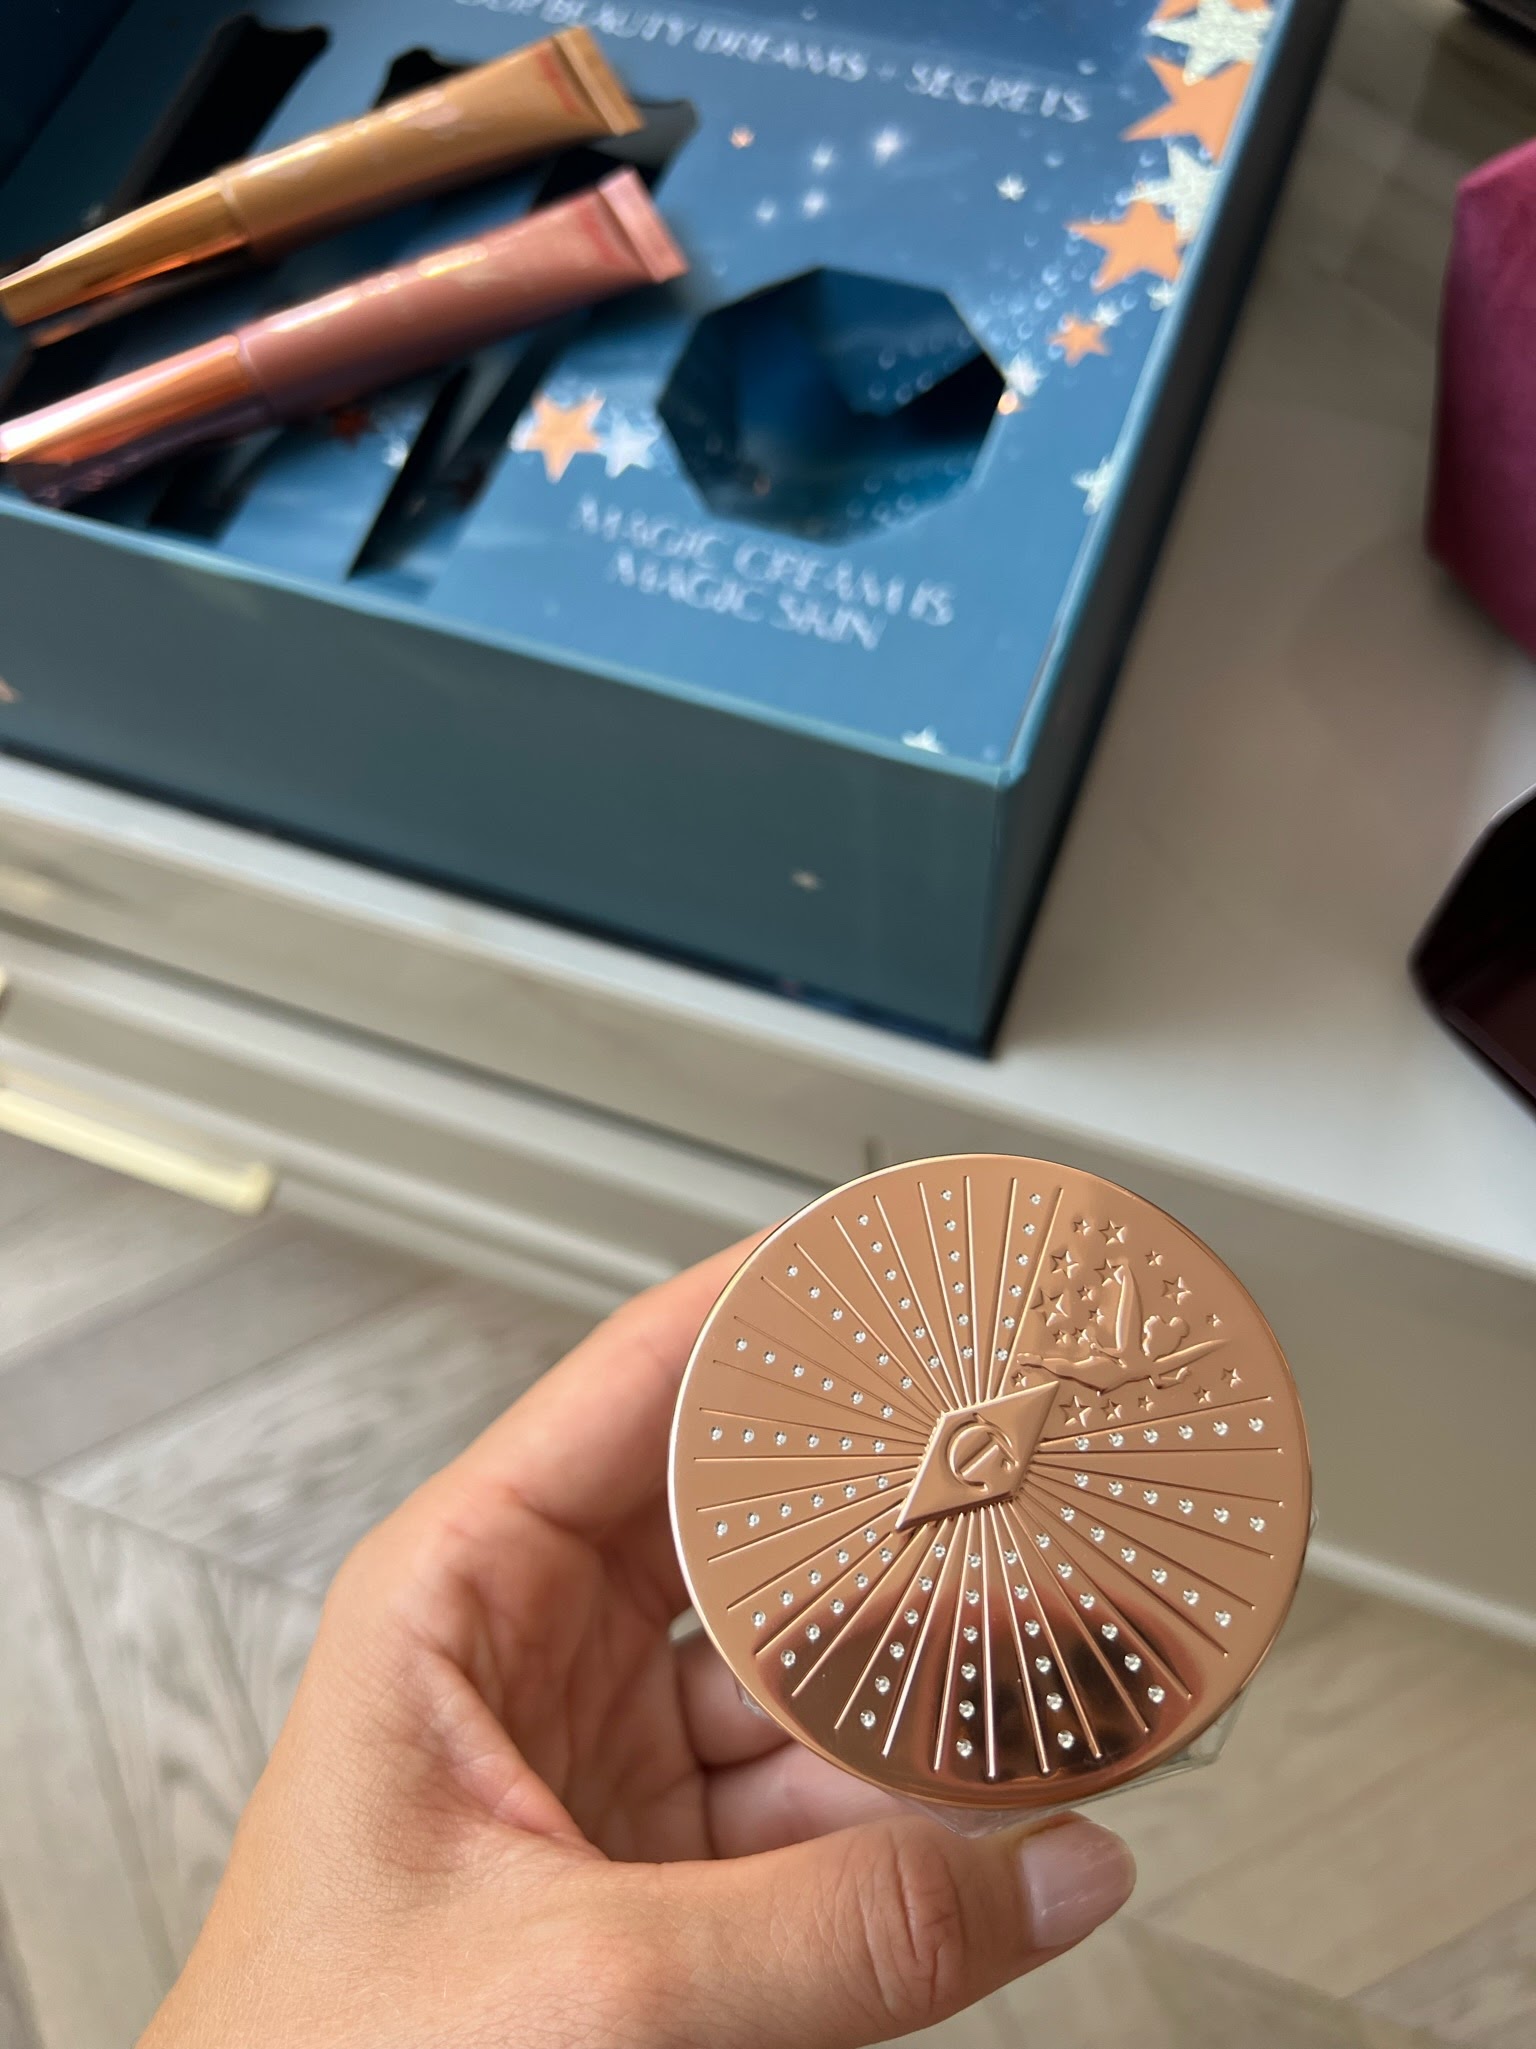 Limited-edition Collectables Kit: Disney100 X Charlotte Tilbury